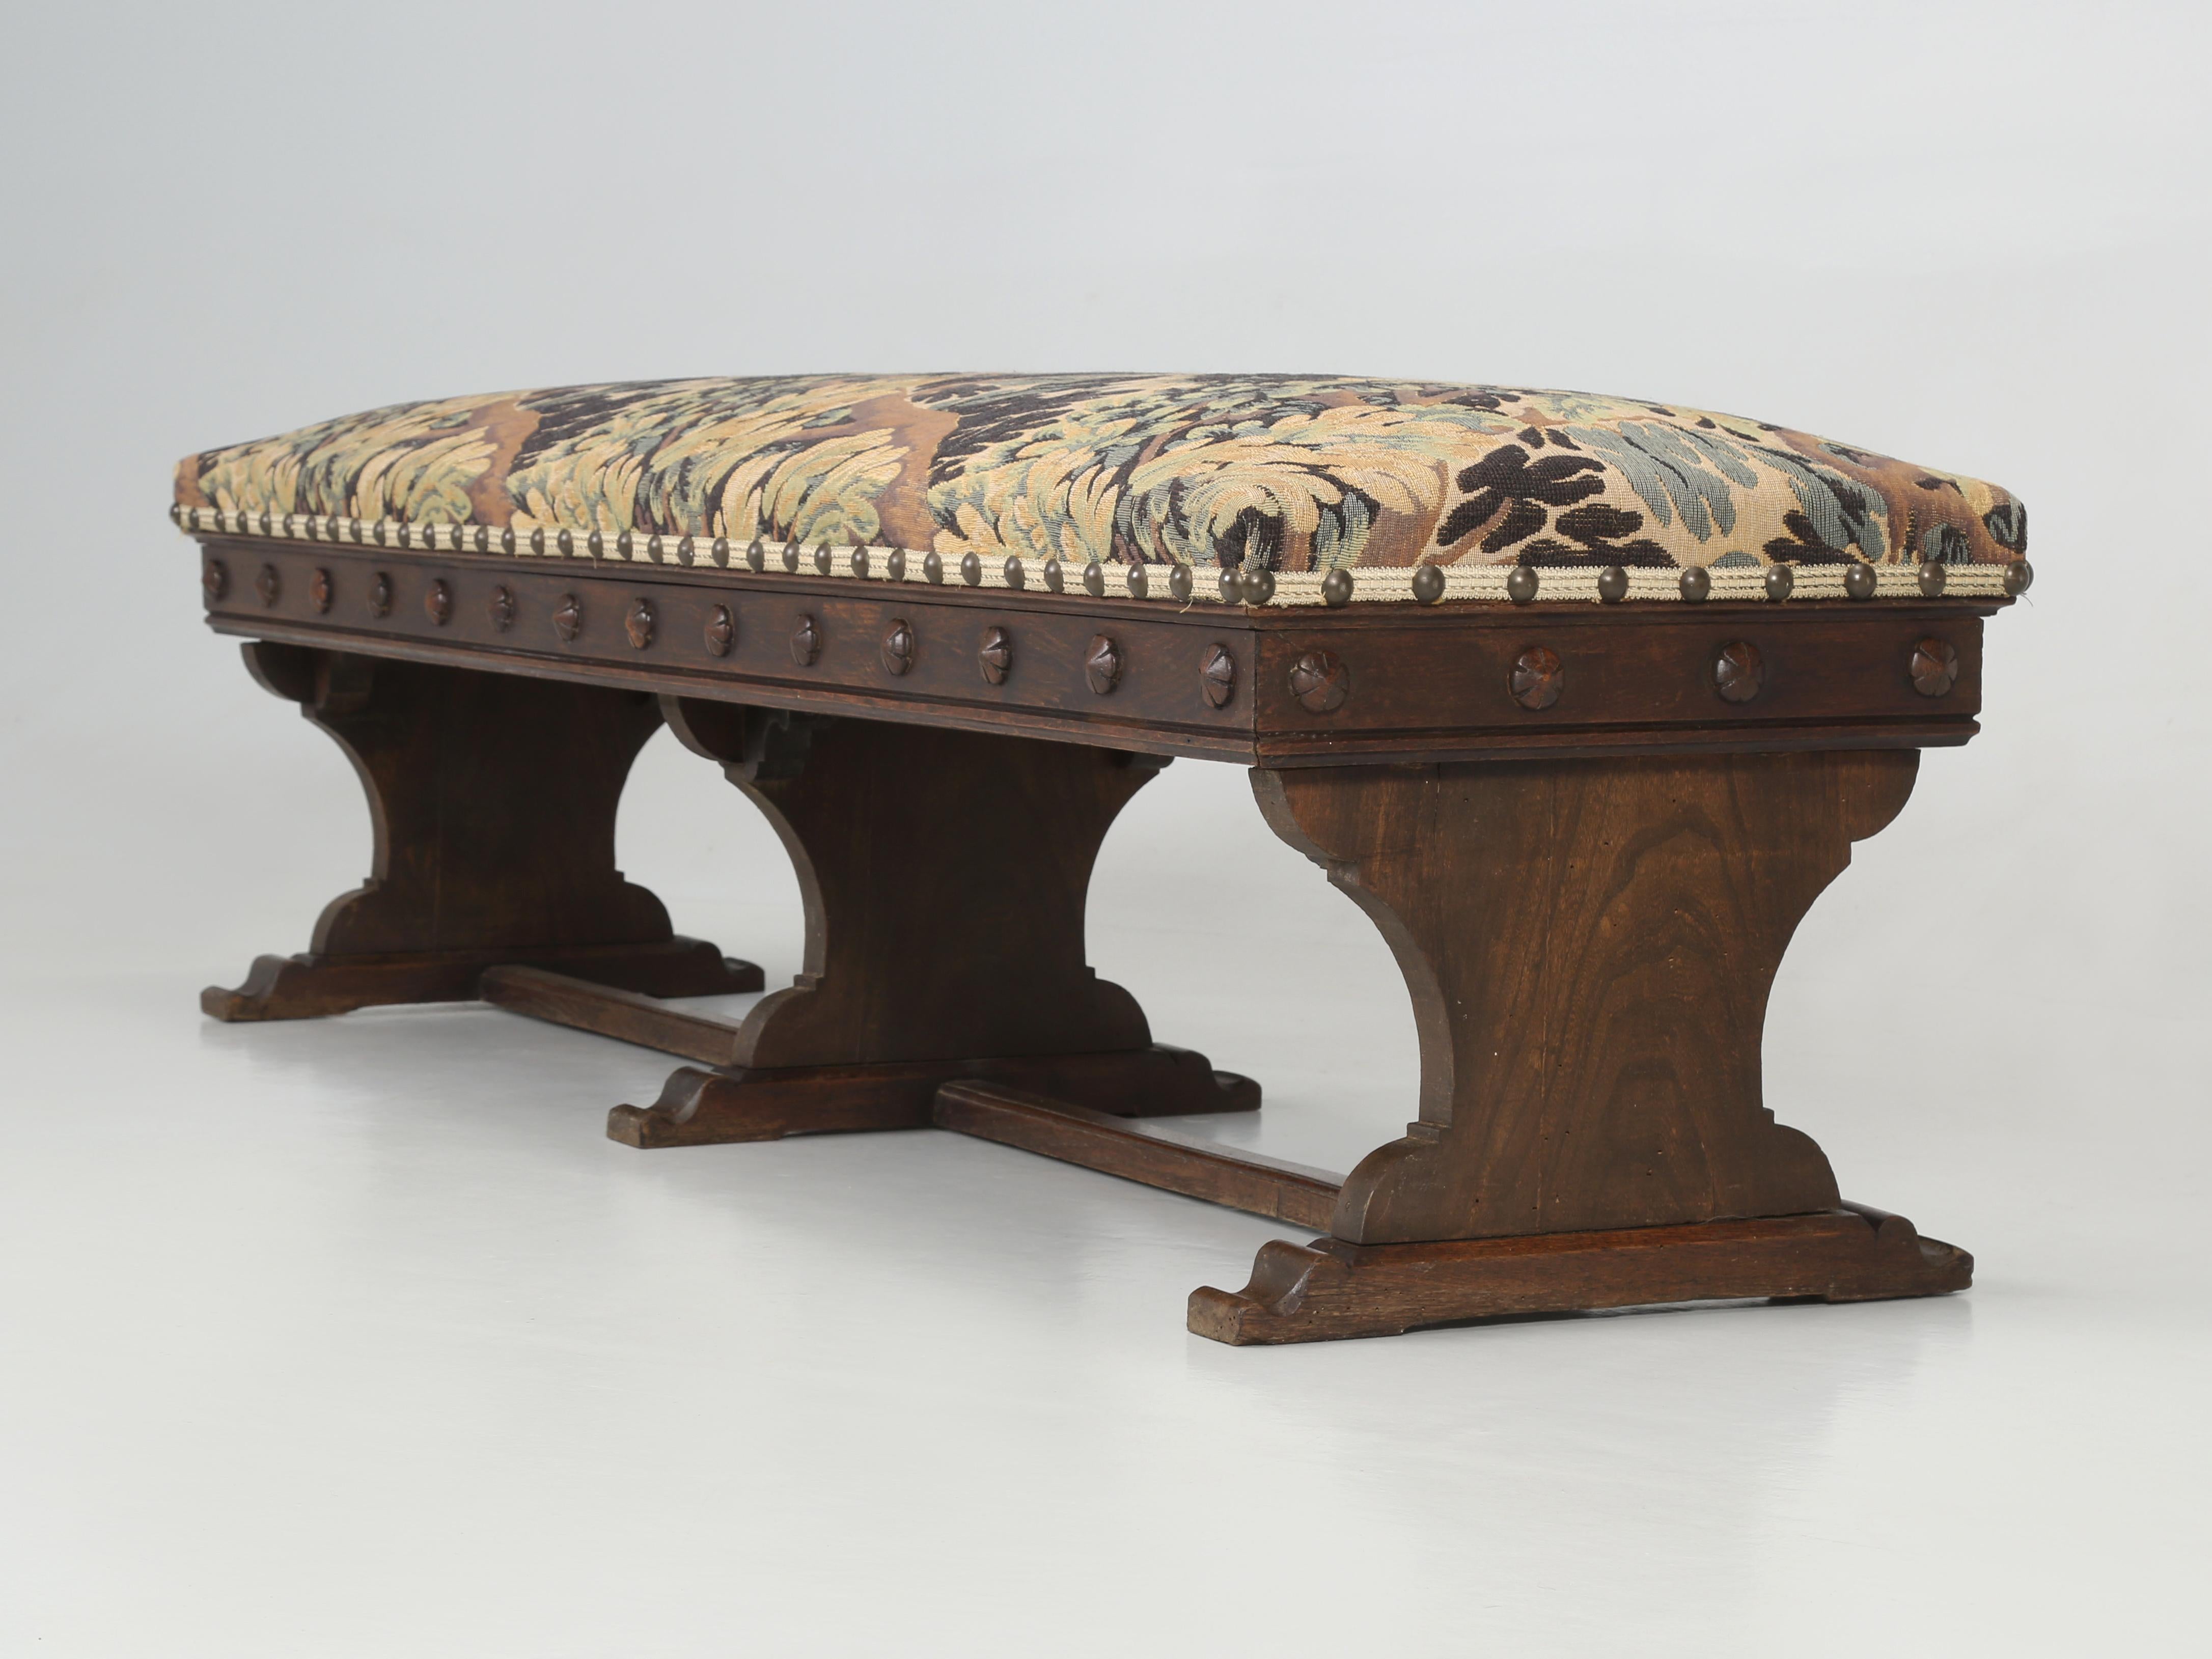 Antique French Upholstered Bench from the mid-1800s and appears to still be in its Original Finish and an Old fabric. Structurally sound and cosmetically original. This is one of a matching pair we have in stock and we are offering the Antique